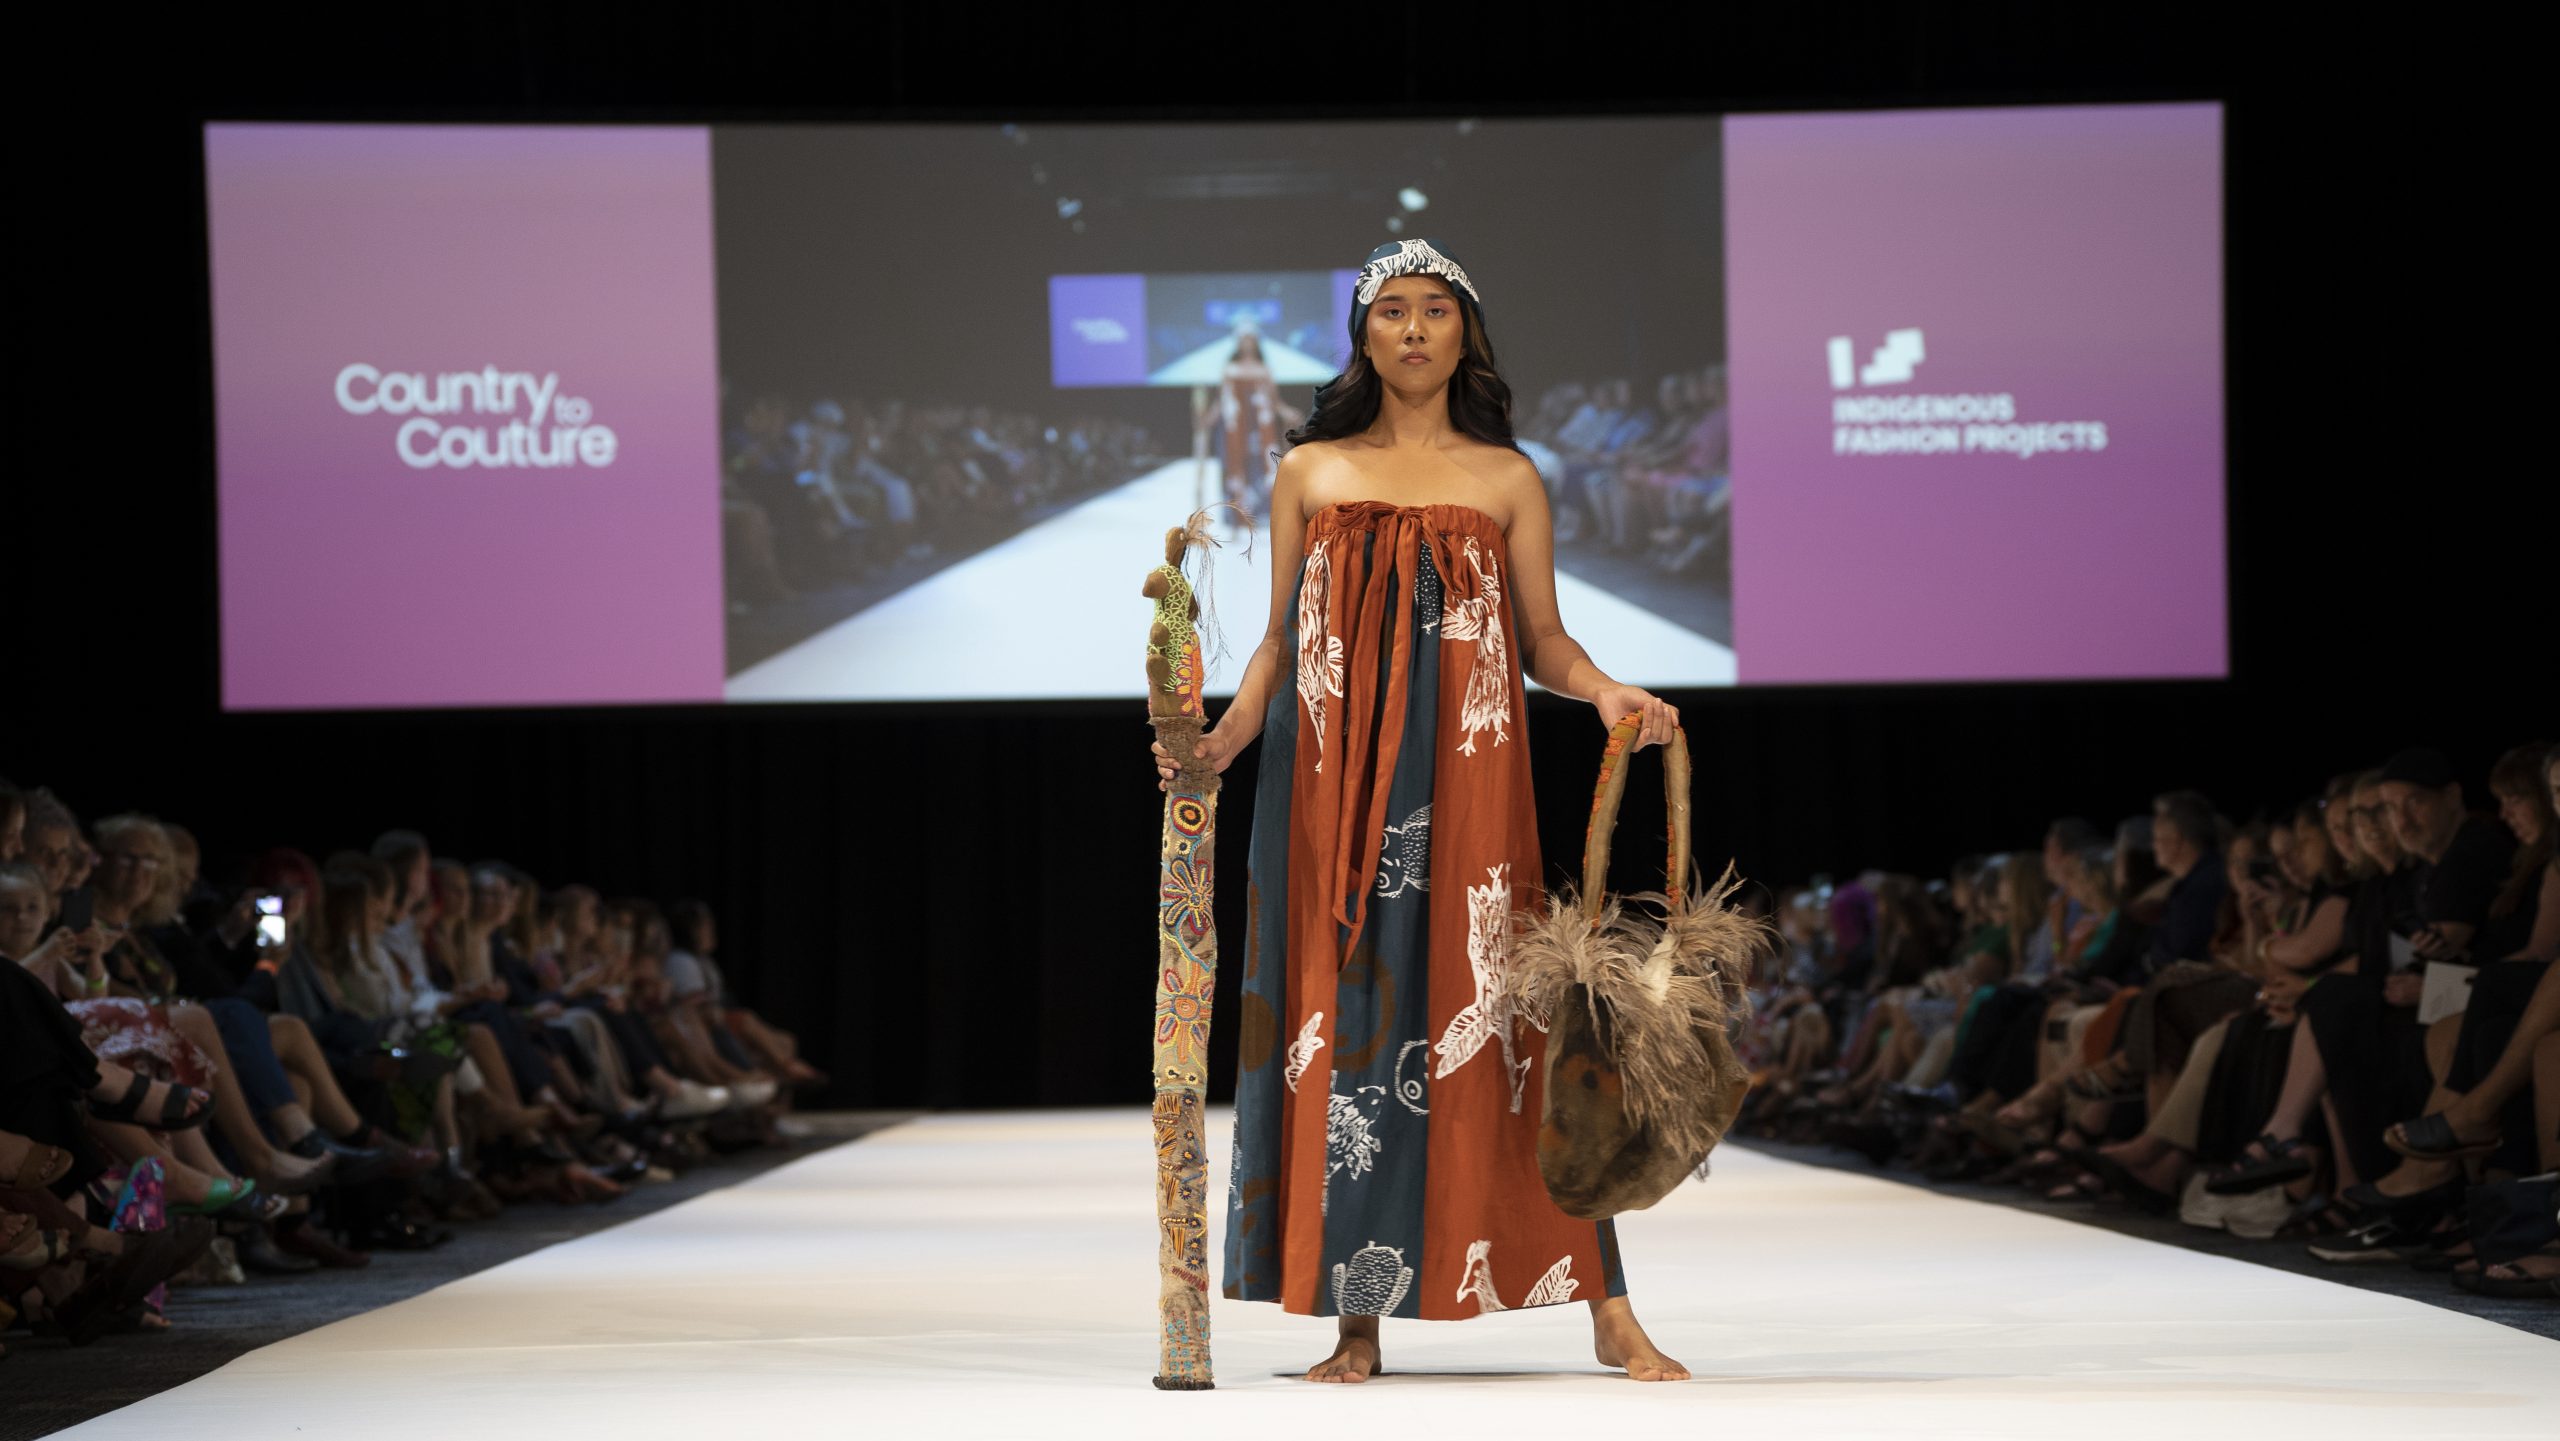 COUNTRY TO COUTURE: Indigenous Fashion Projects Celebrates Vibrant Creations from First Nations Creatives